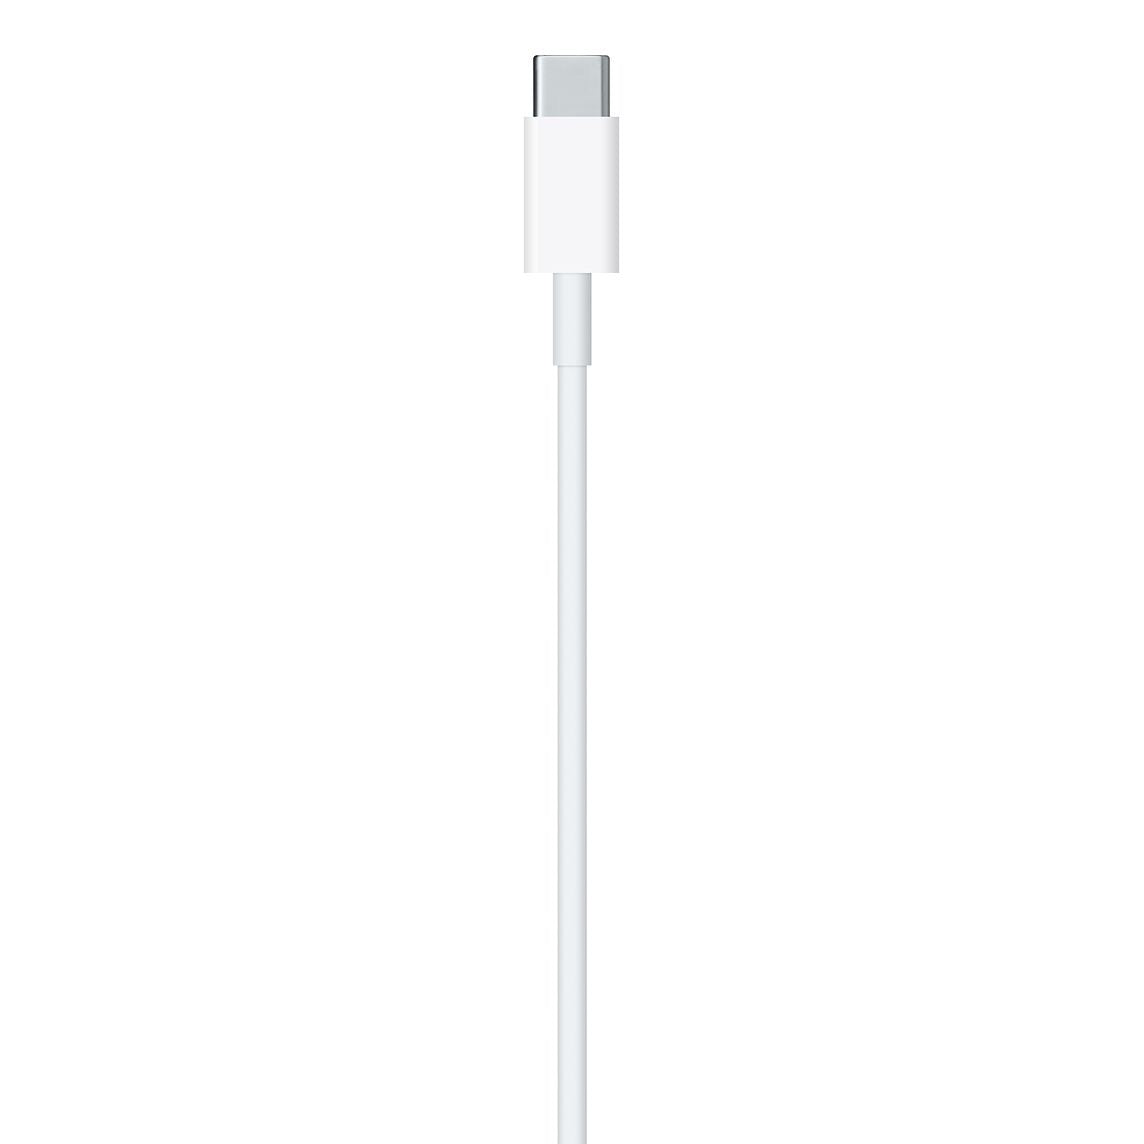 iPhone USB-C to Lightning Cable